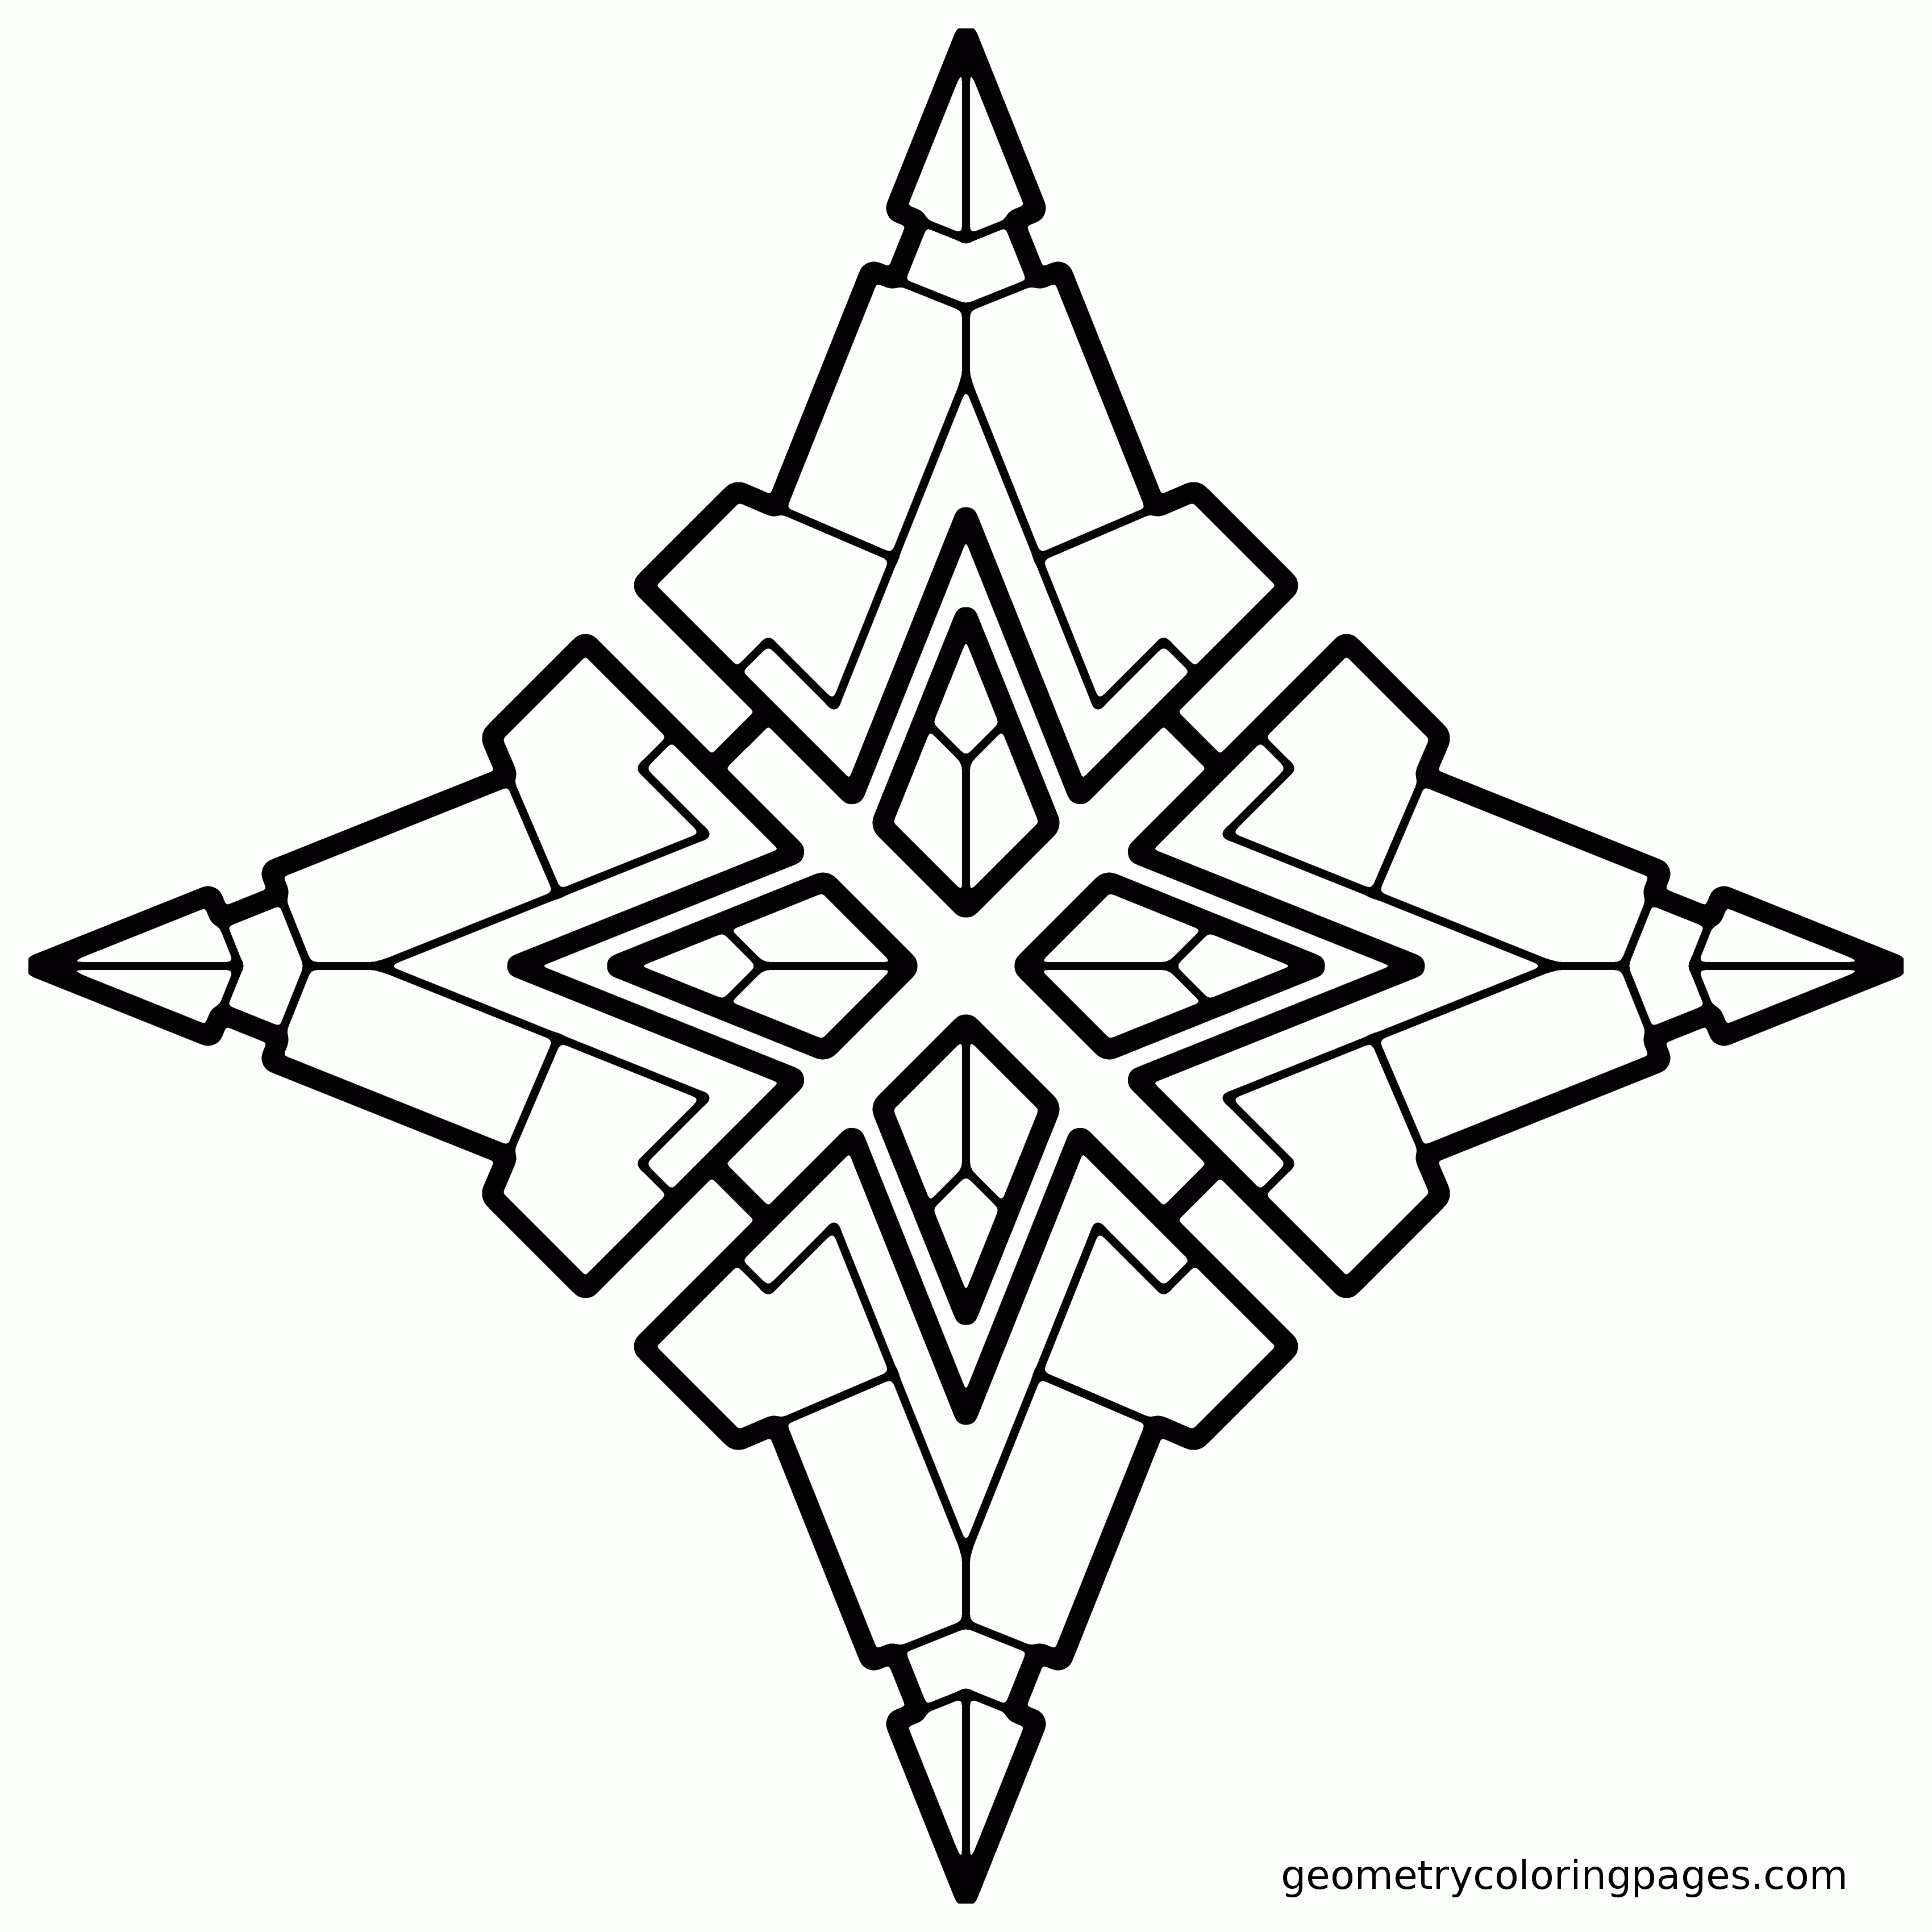 12 Pics Of Easy Geometric Design Coloring Pages - Simple Geometric